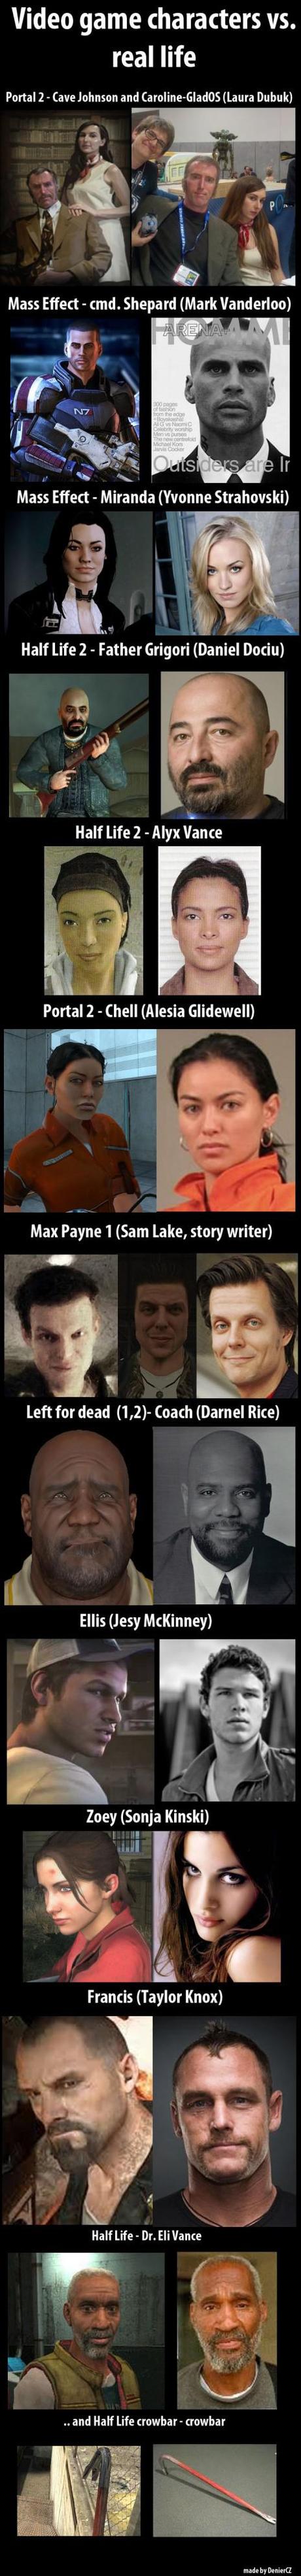 Video Game Characters and Their Real Life Face Models